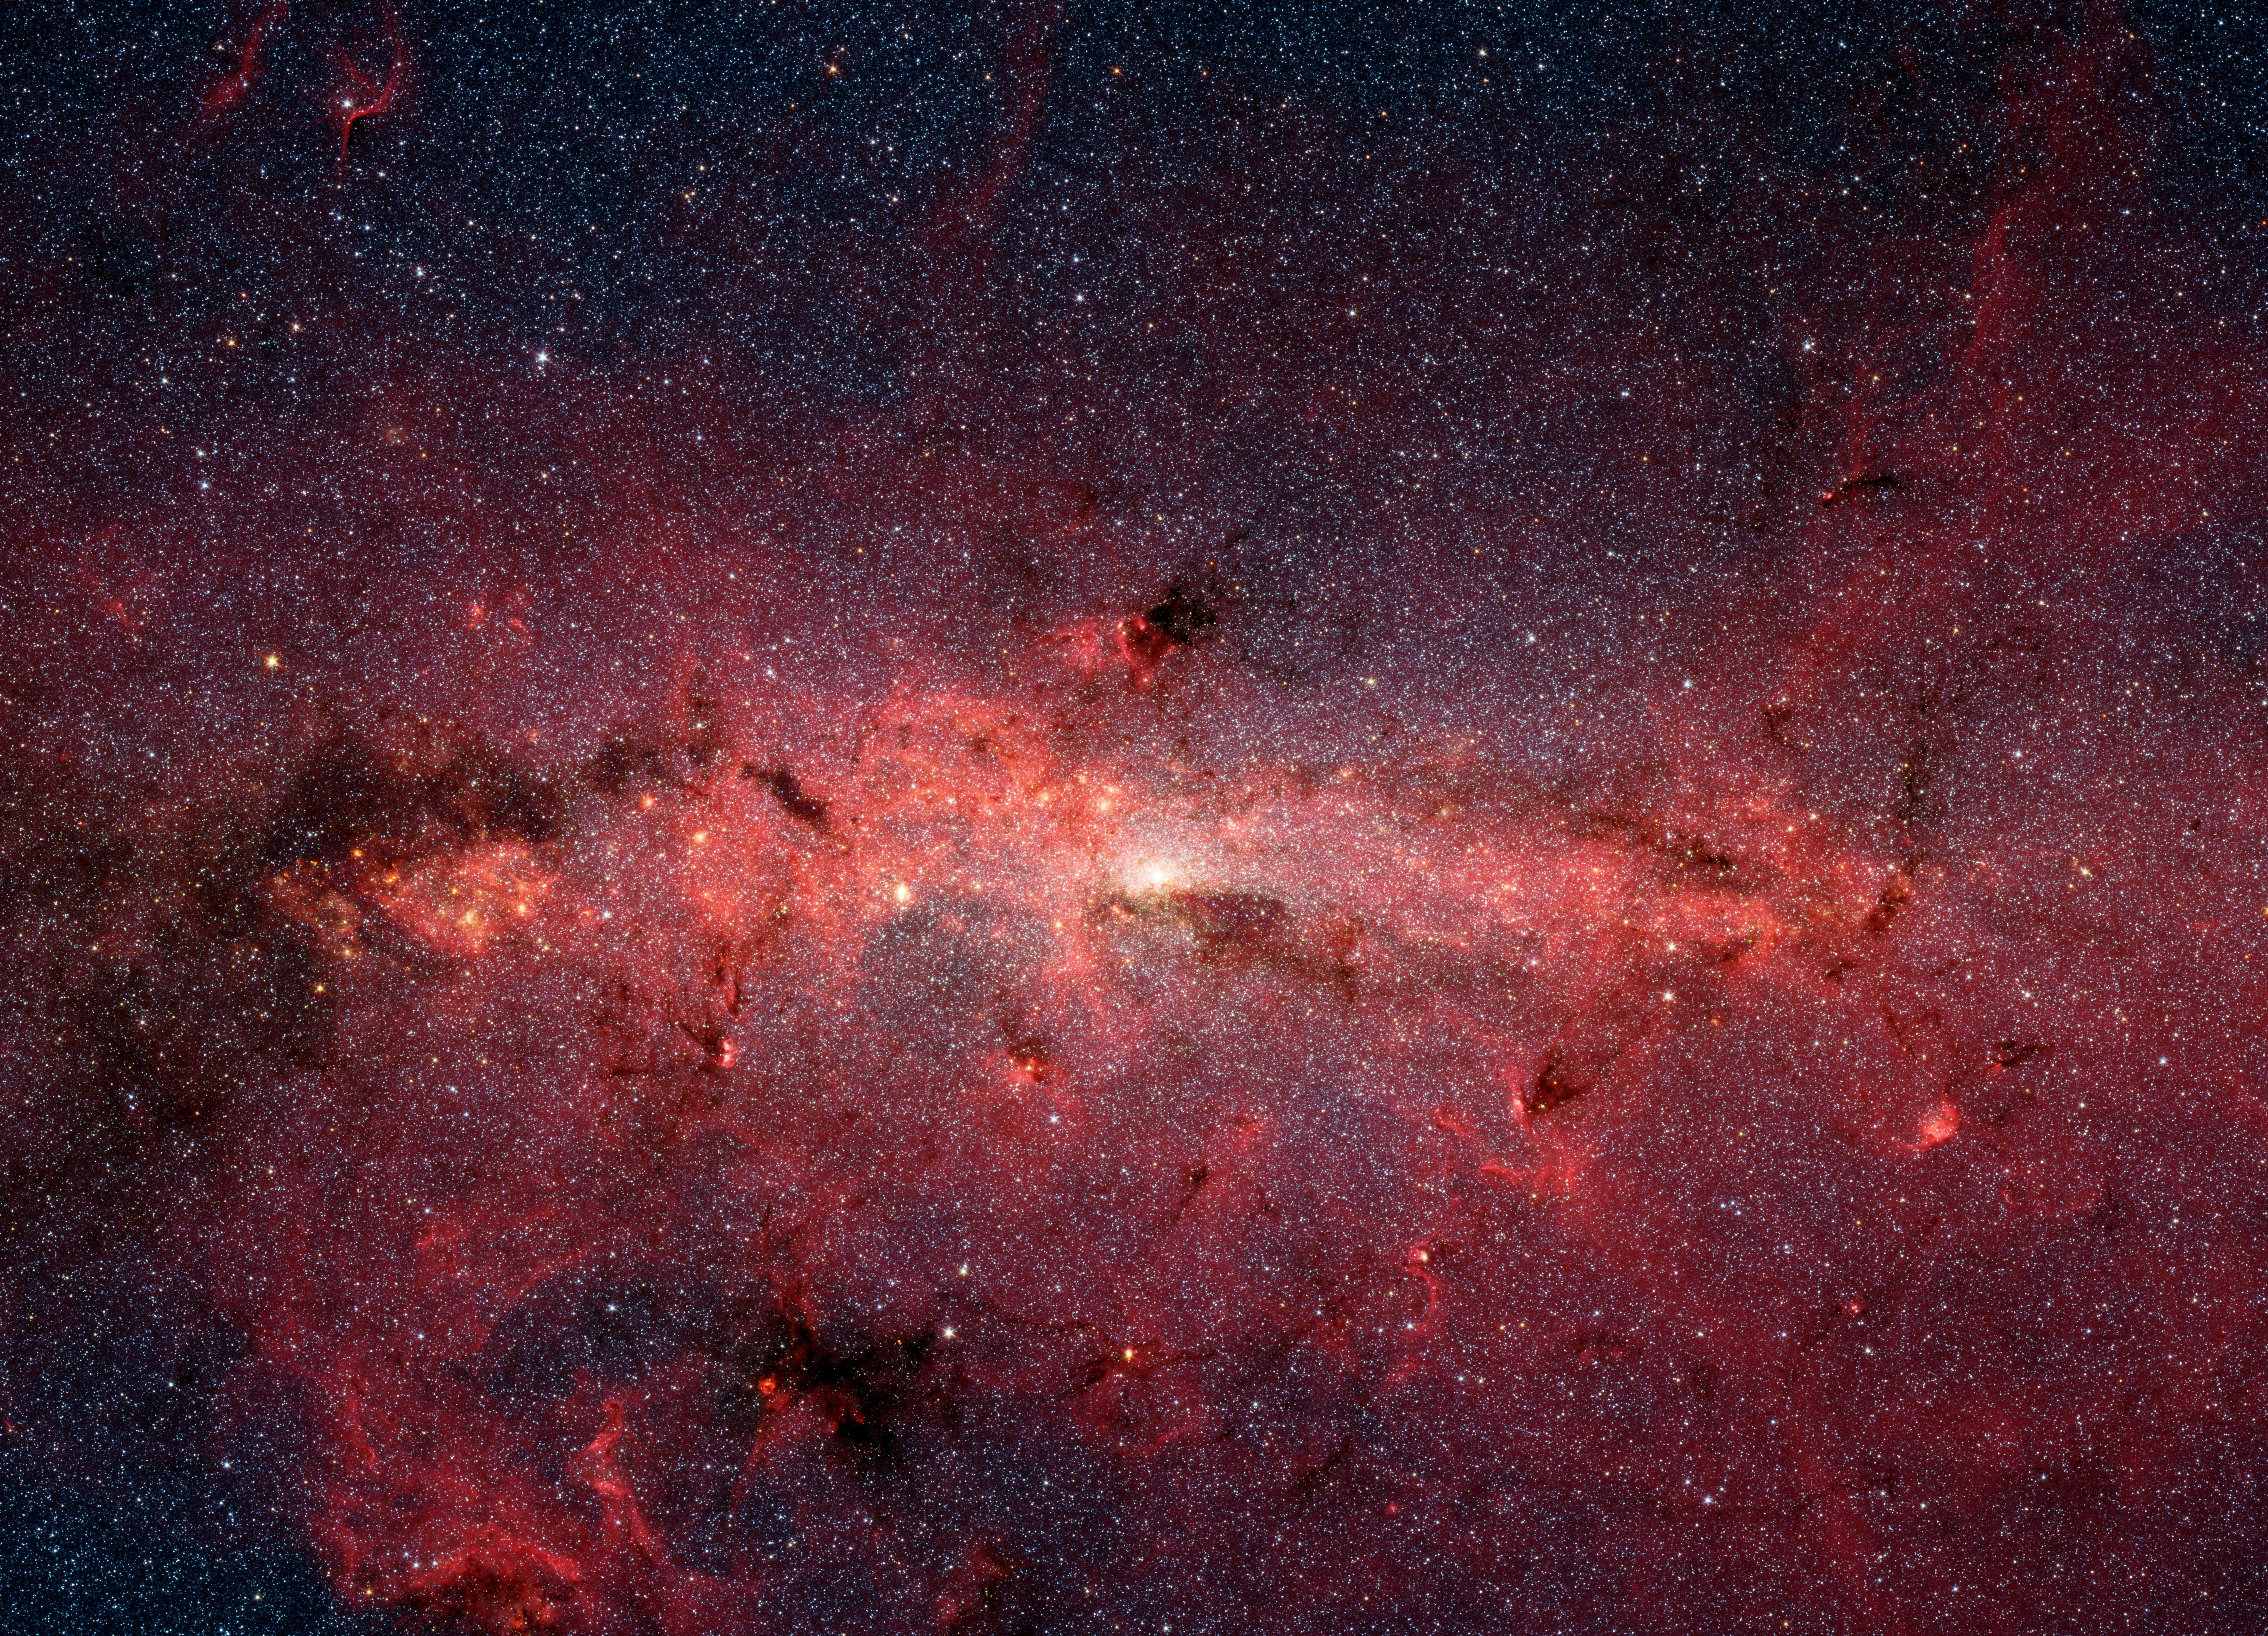 A bright band of crimson-colored dust stretches across the center of this image covered in tiny specs of light from hundreds of thousands of stars.